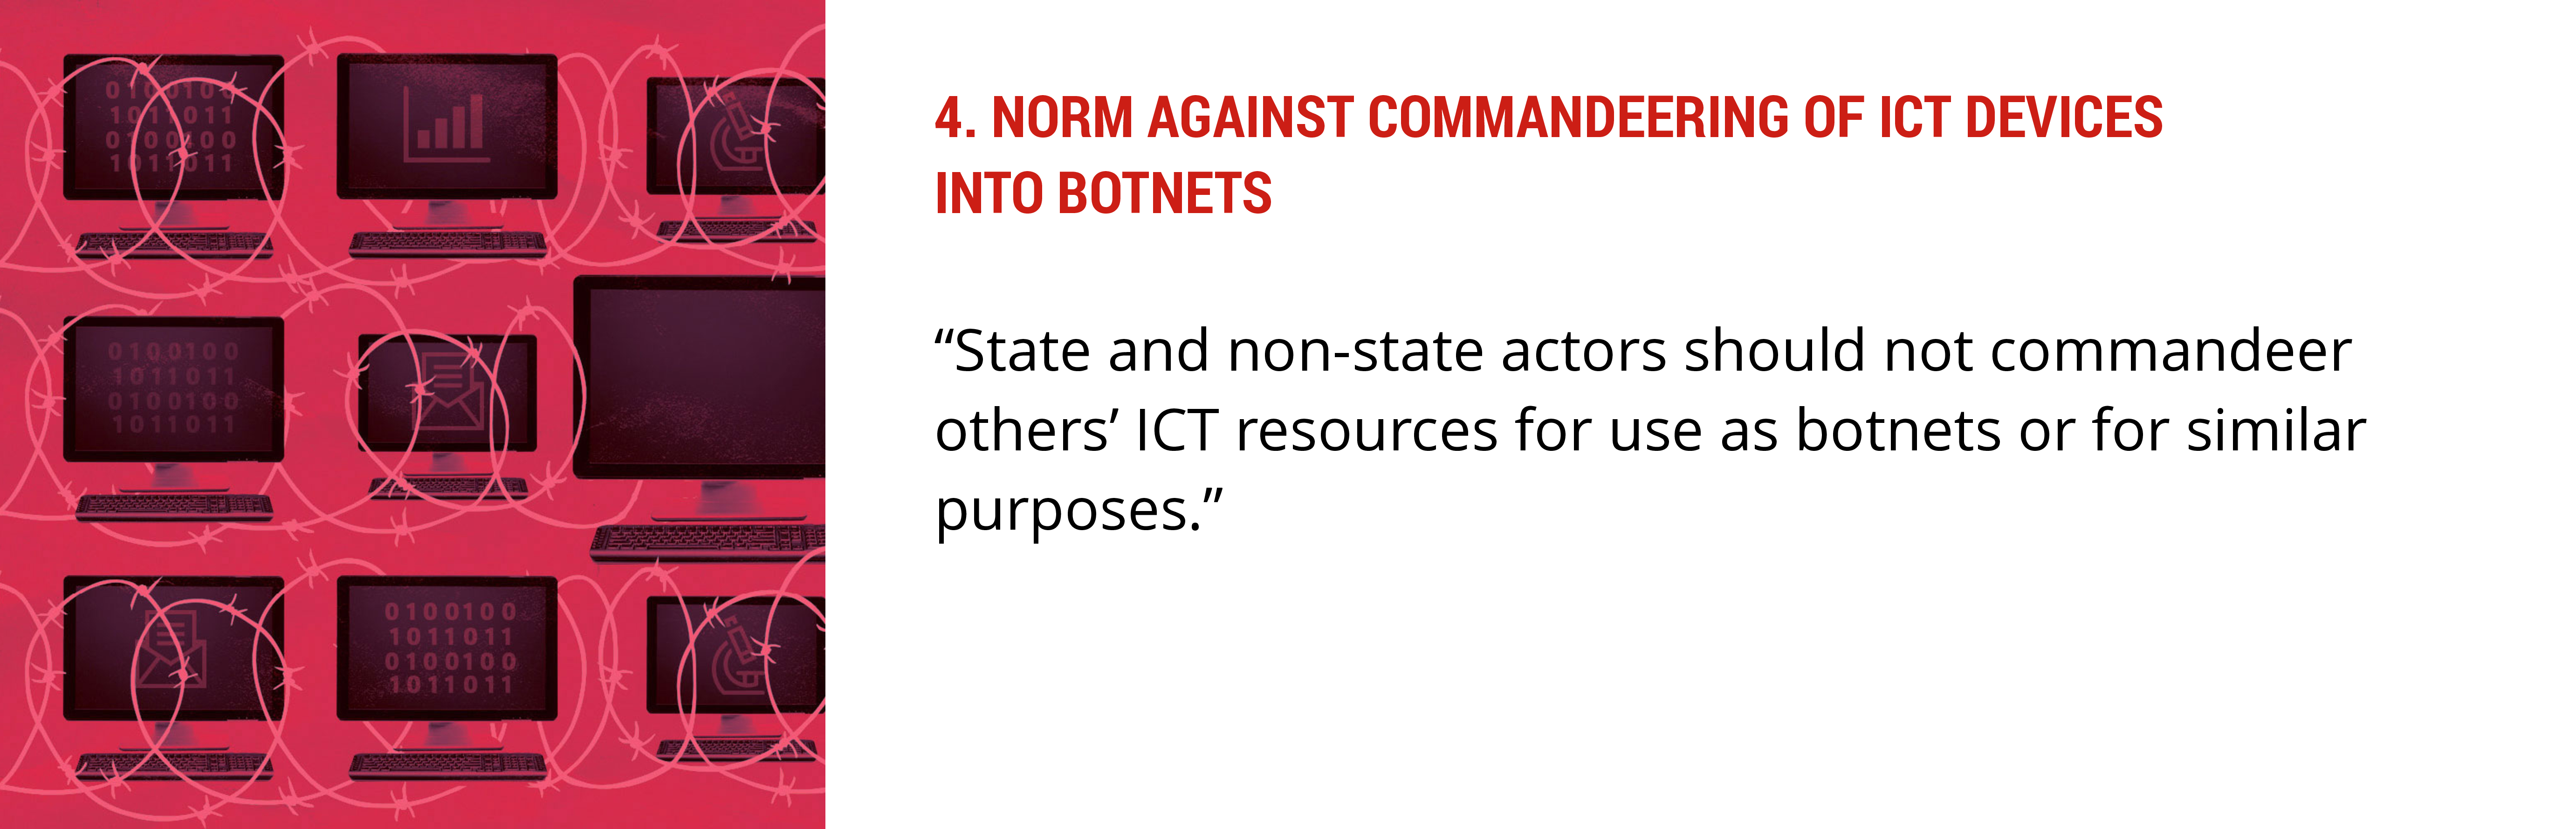 Norm Against Commandeering of ICT Devices into Botnets 